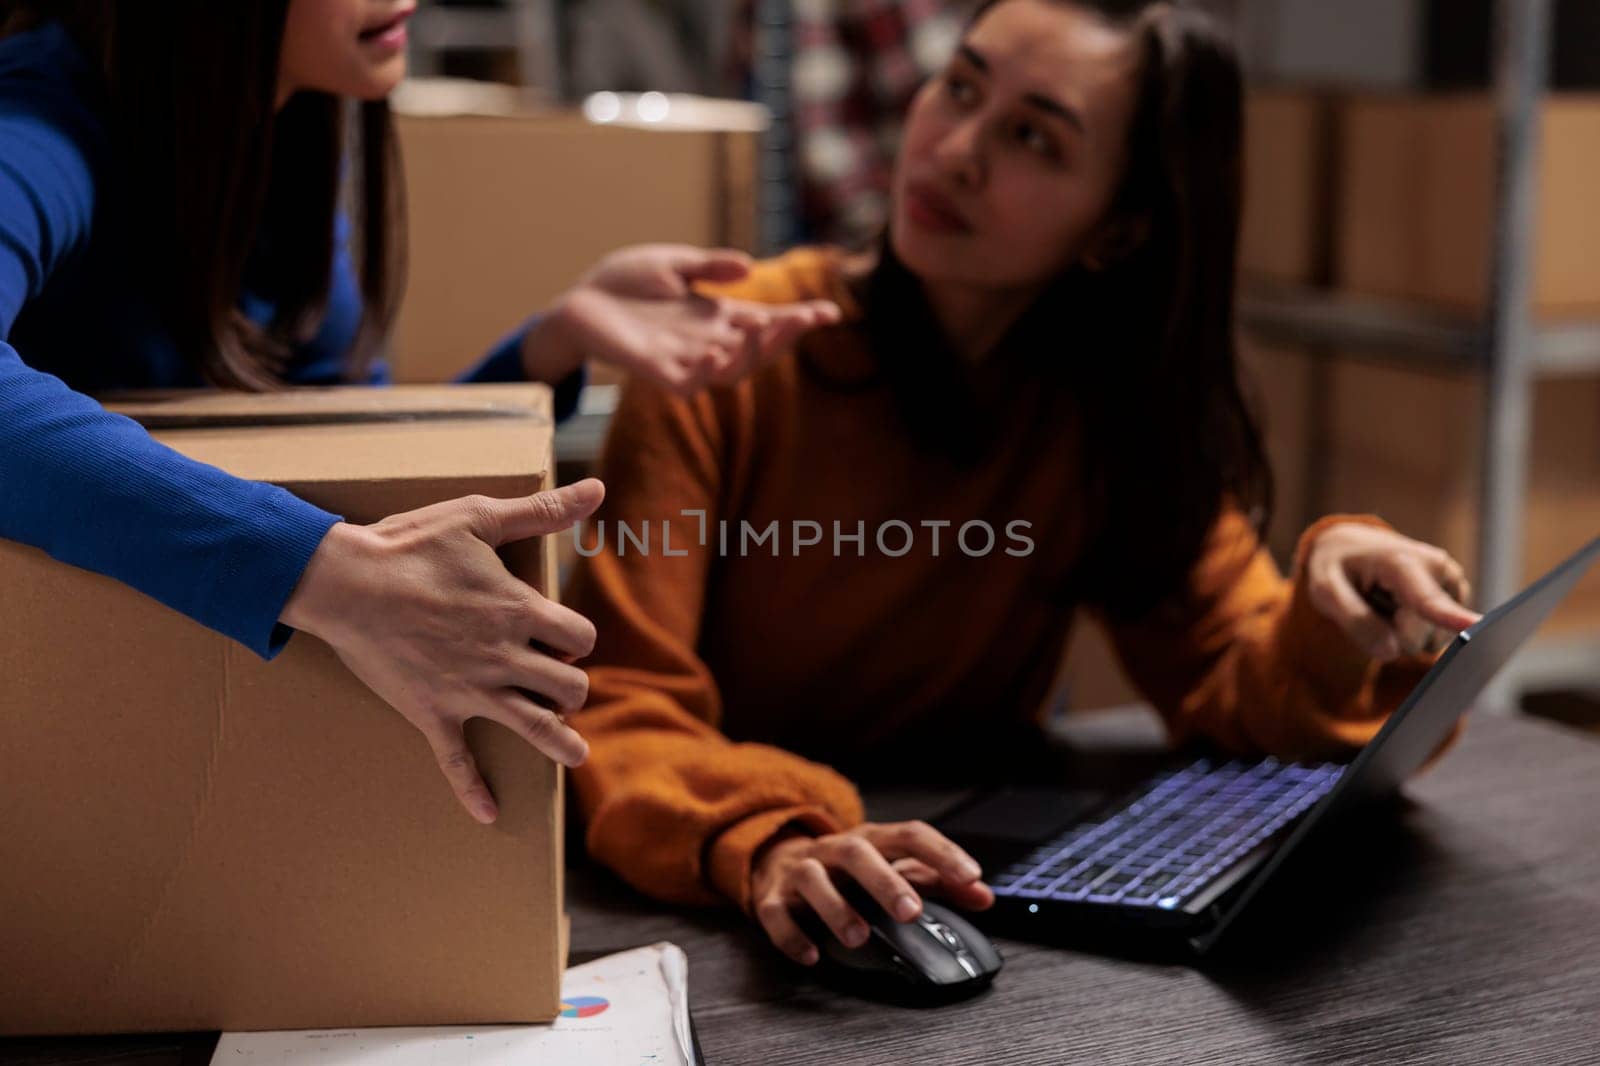 Storehouse employee asking coworker about pick ticket on laptop while working at desk in ecommerce retail business storage room. Colleagues tracking parcel shipment and preparing box for dispatching